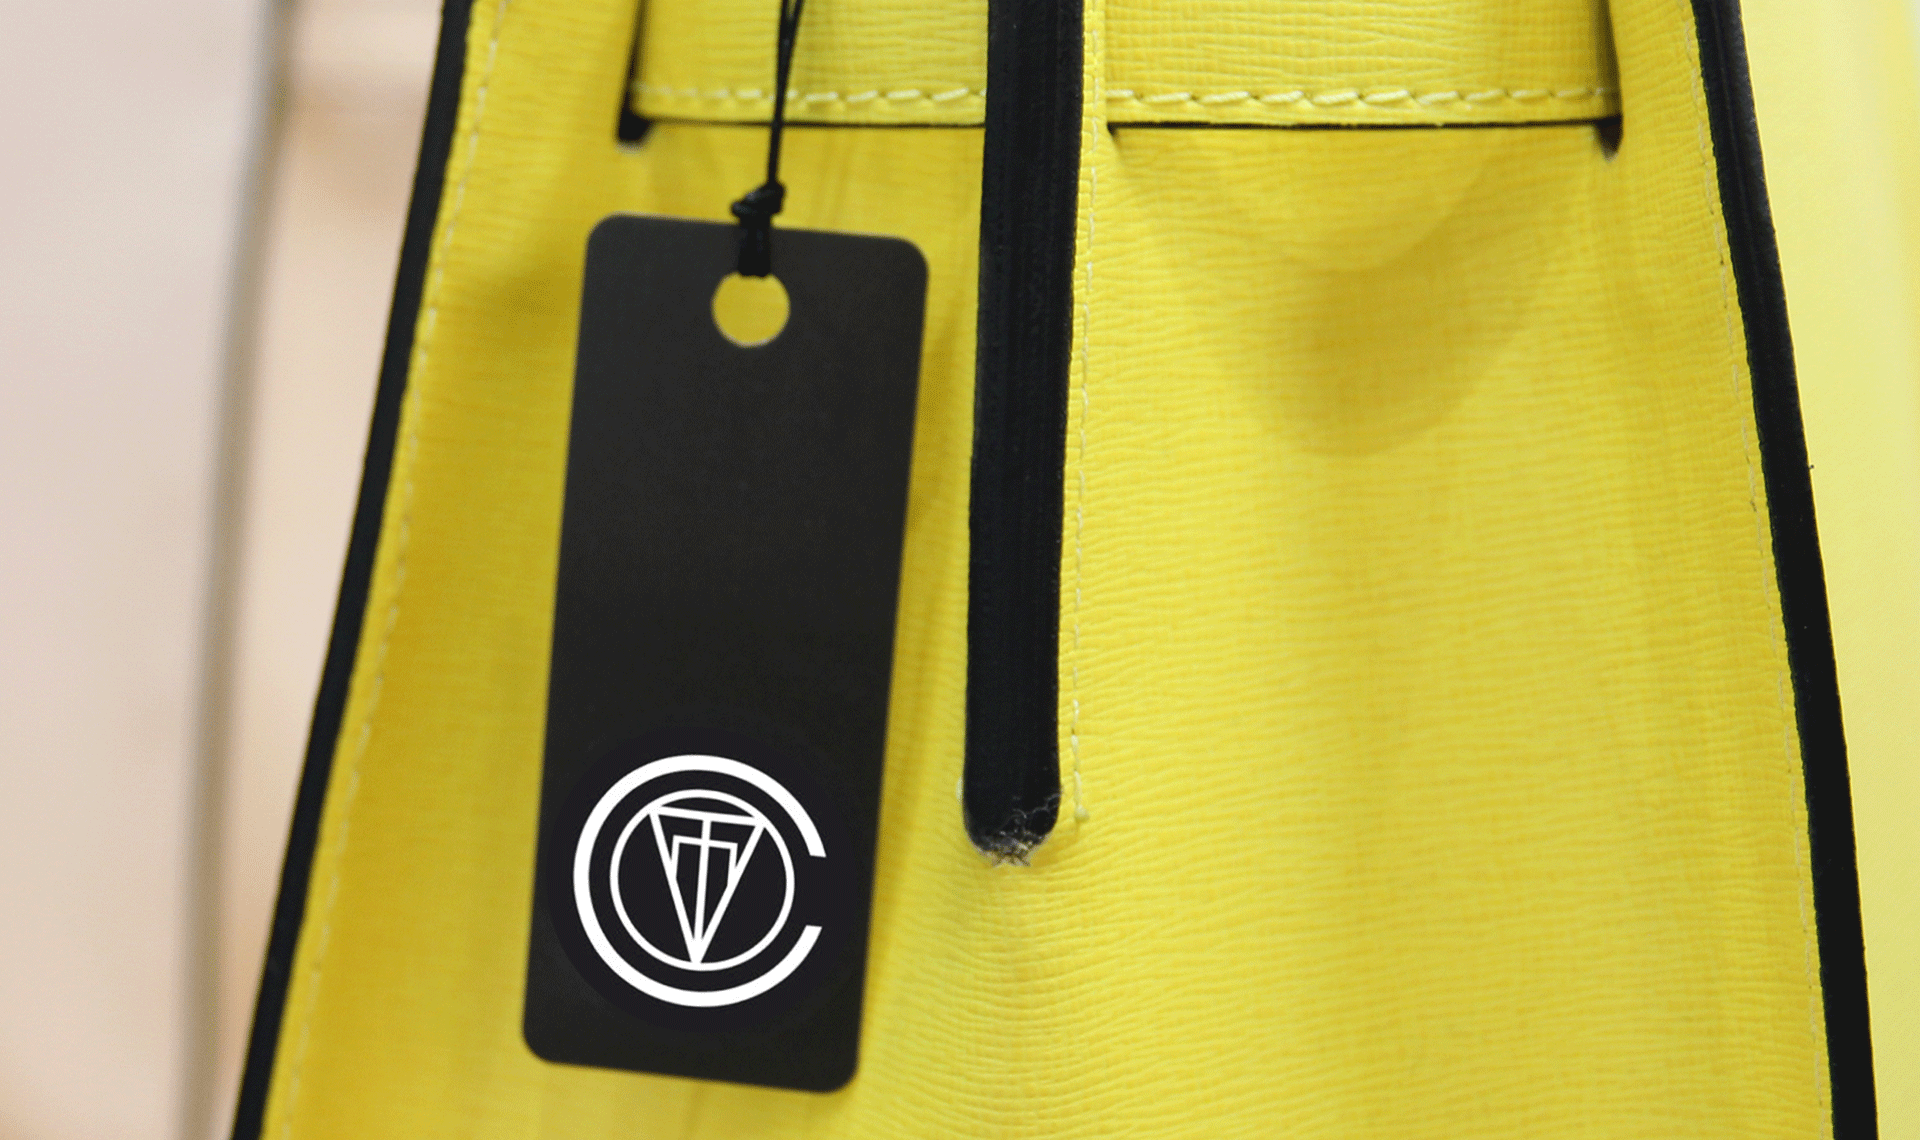 Covet tag hangs from a bright yellow leather bag